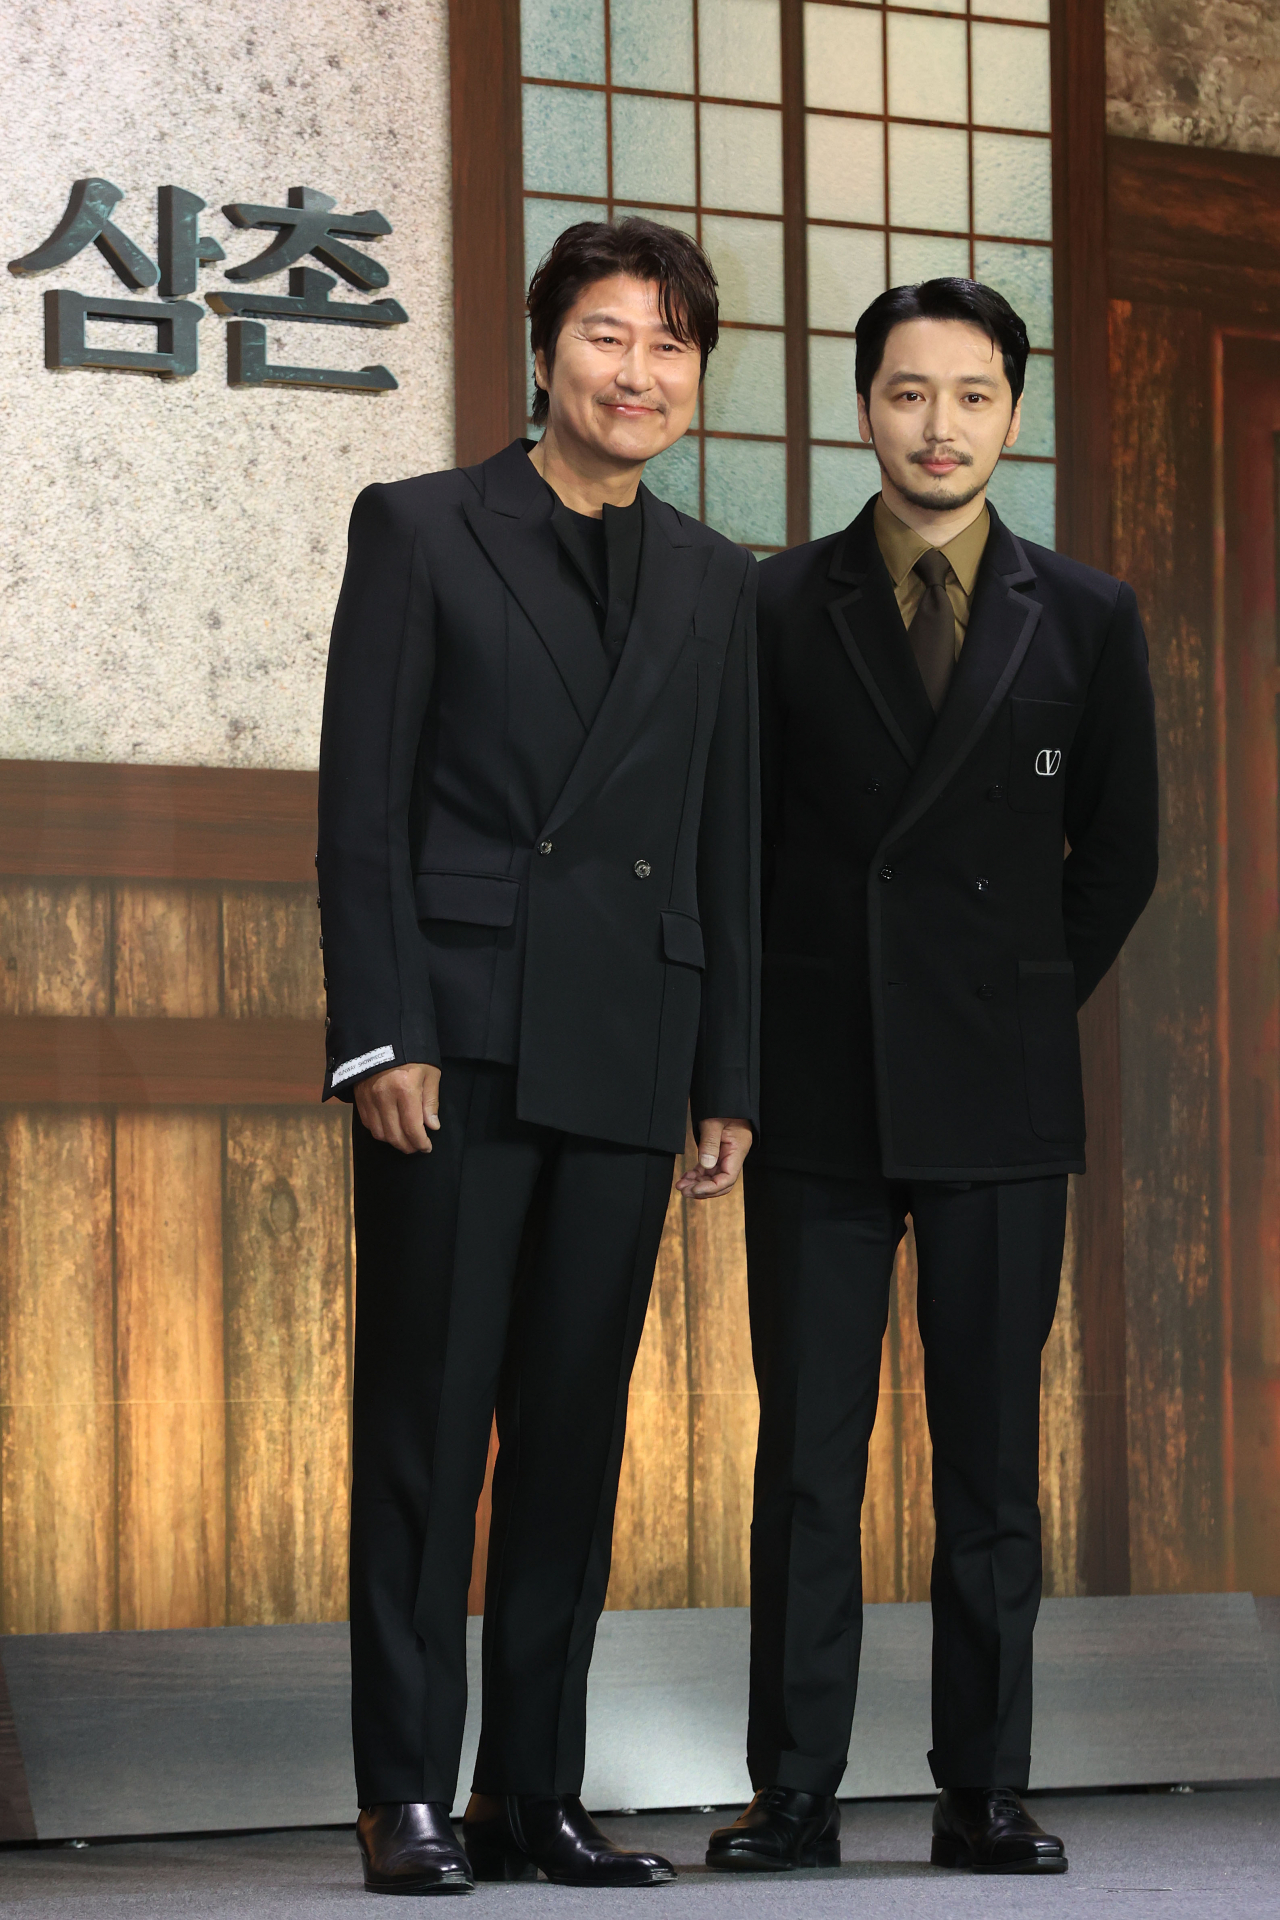 Song Kang-ho (left) and Byun Yo-han pose for a photo during a press conference held in Gangnam-gu, Seoul, Wednesday. (Yonhap)